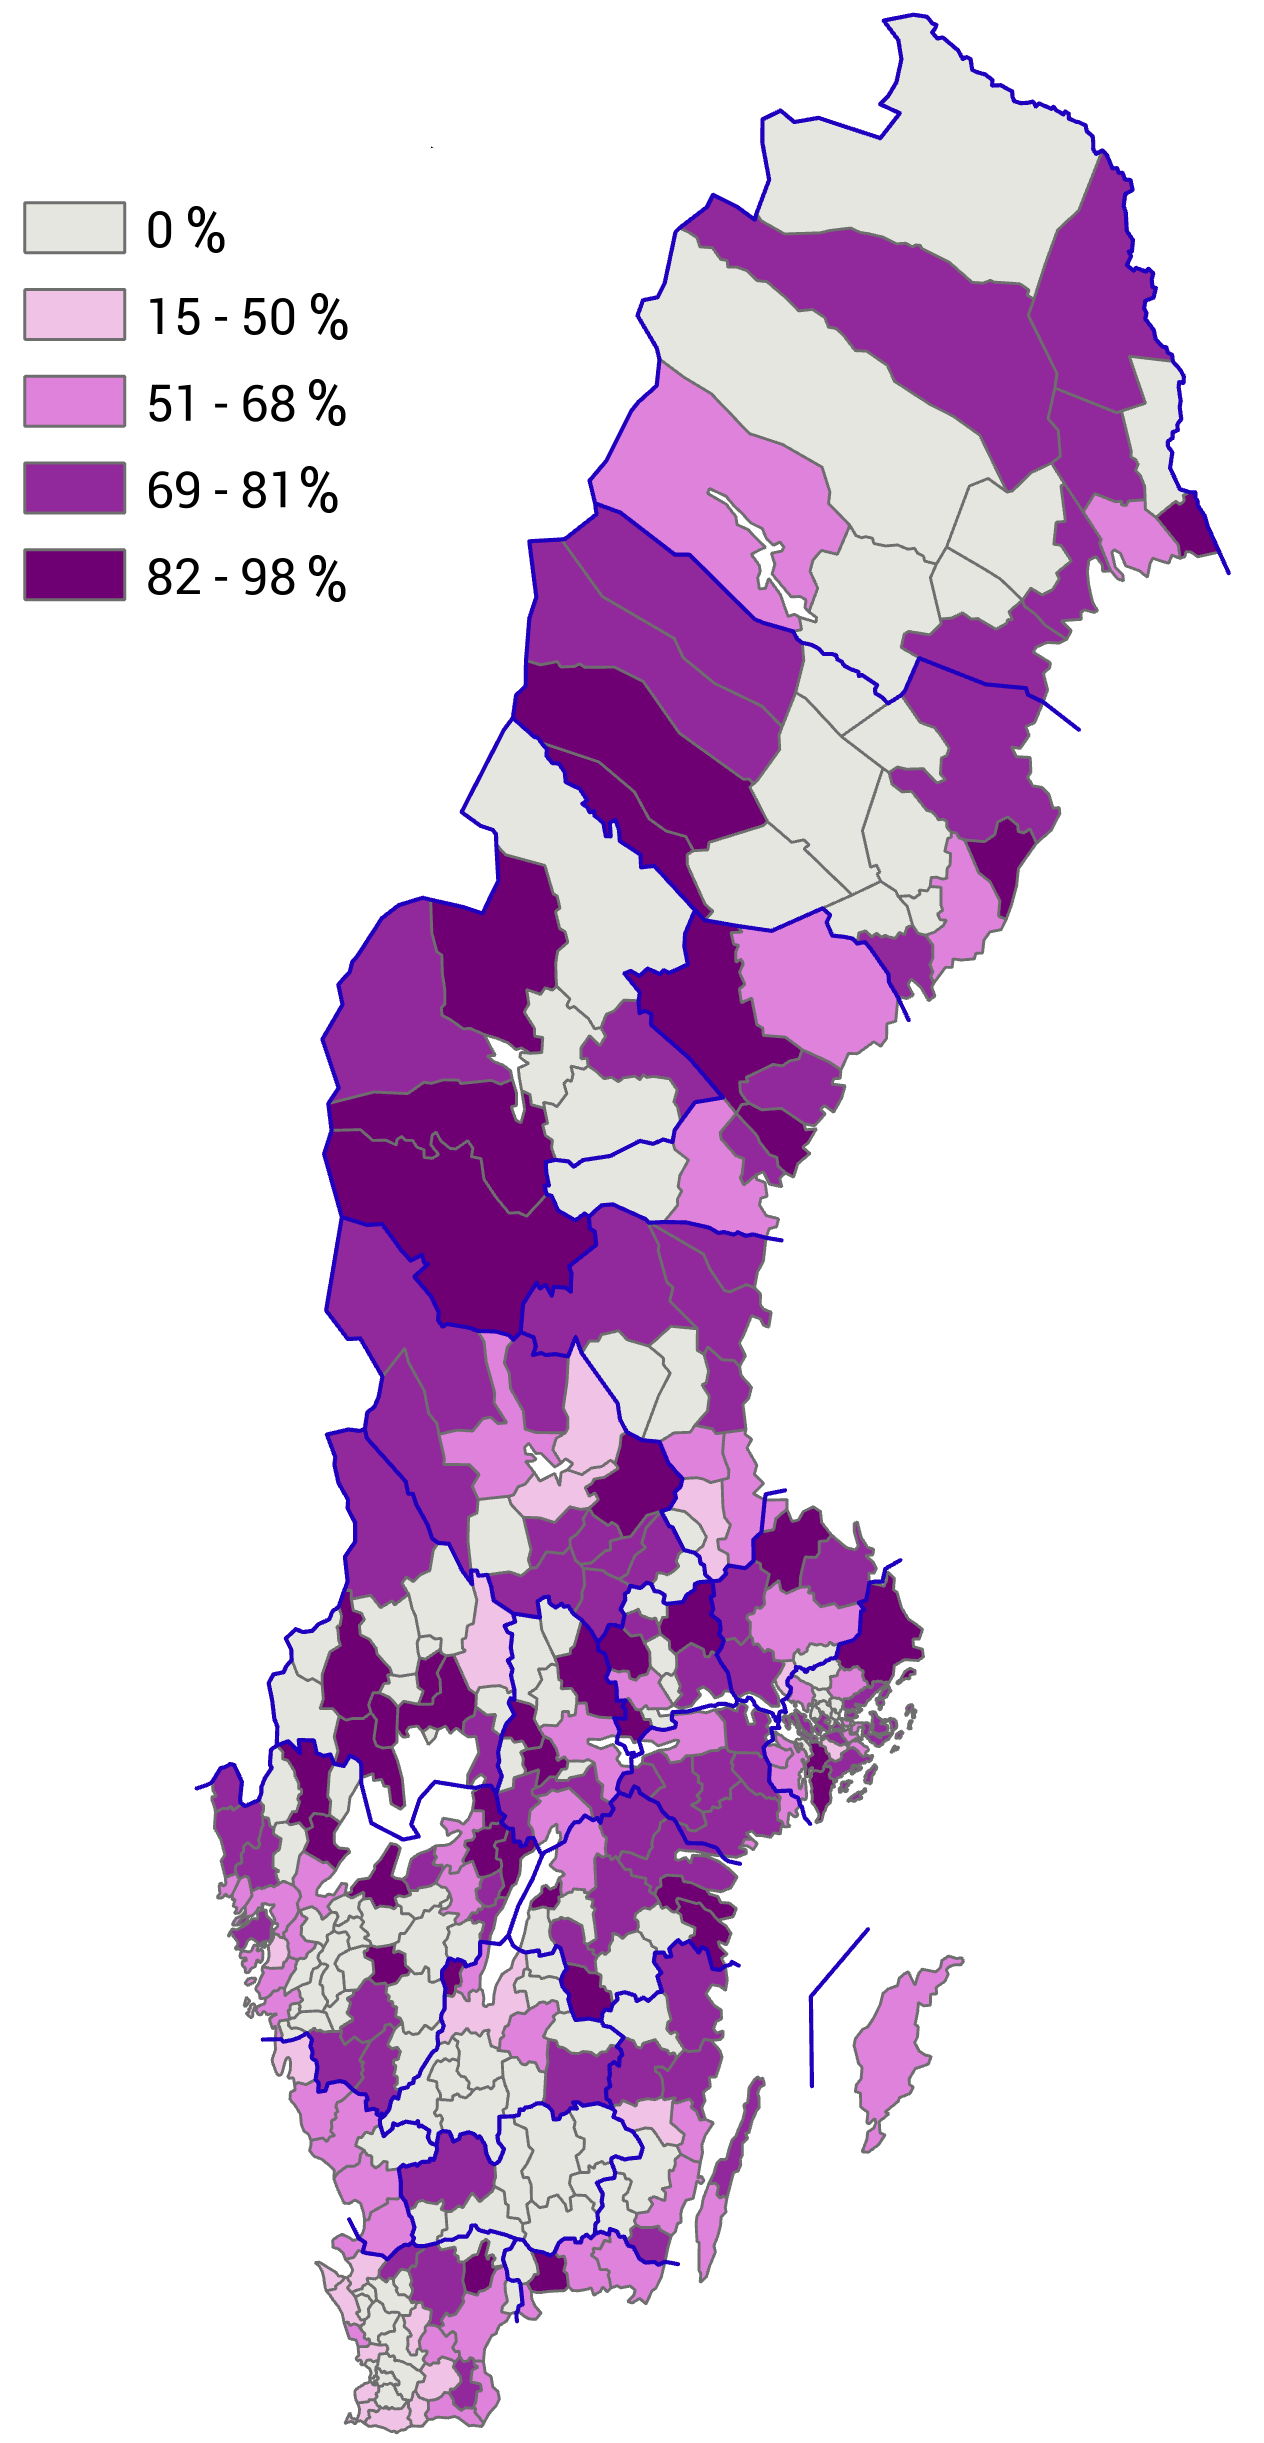 MAp: Proportion of holiday homes out of the total number of one- or two dwelling buildings in holiday home areas, by municipality, 2020